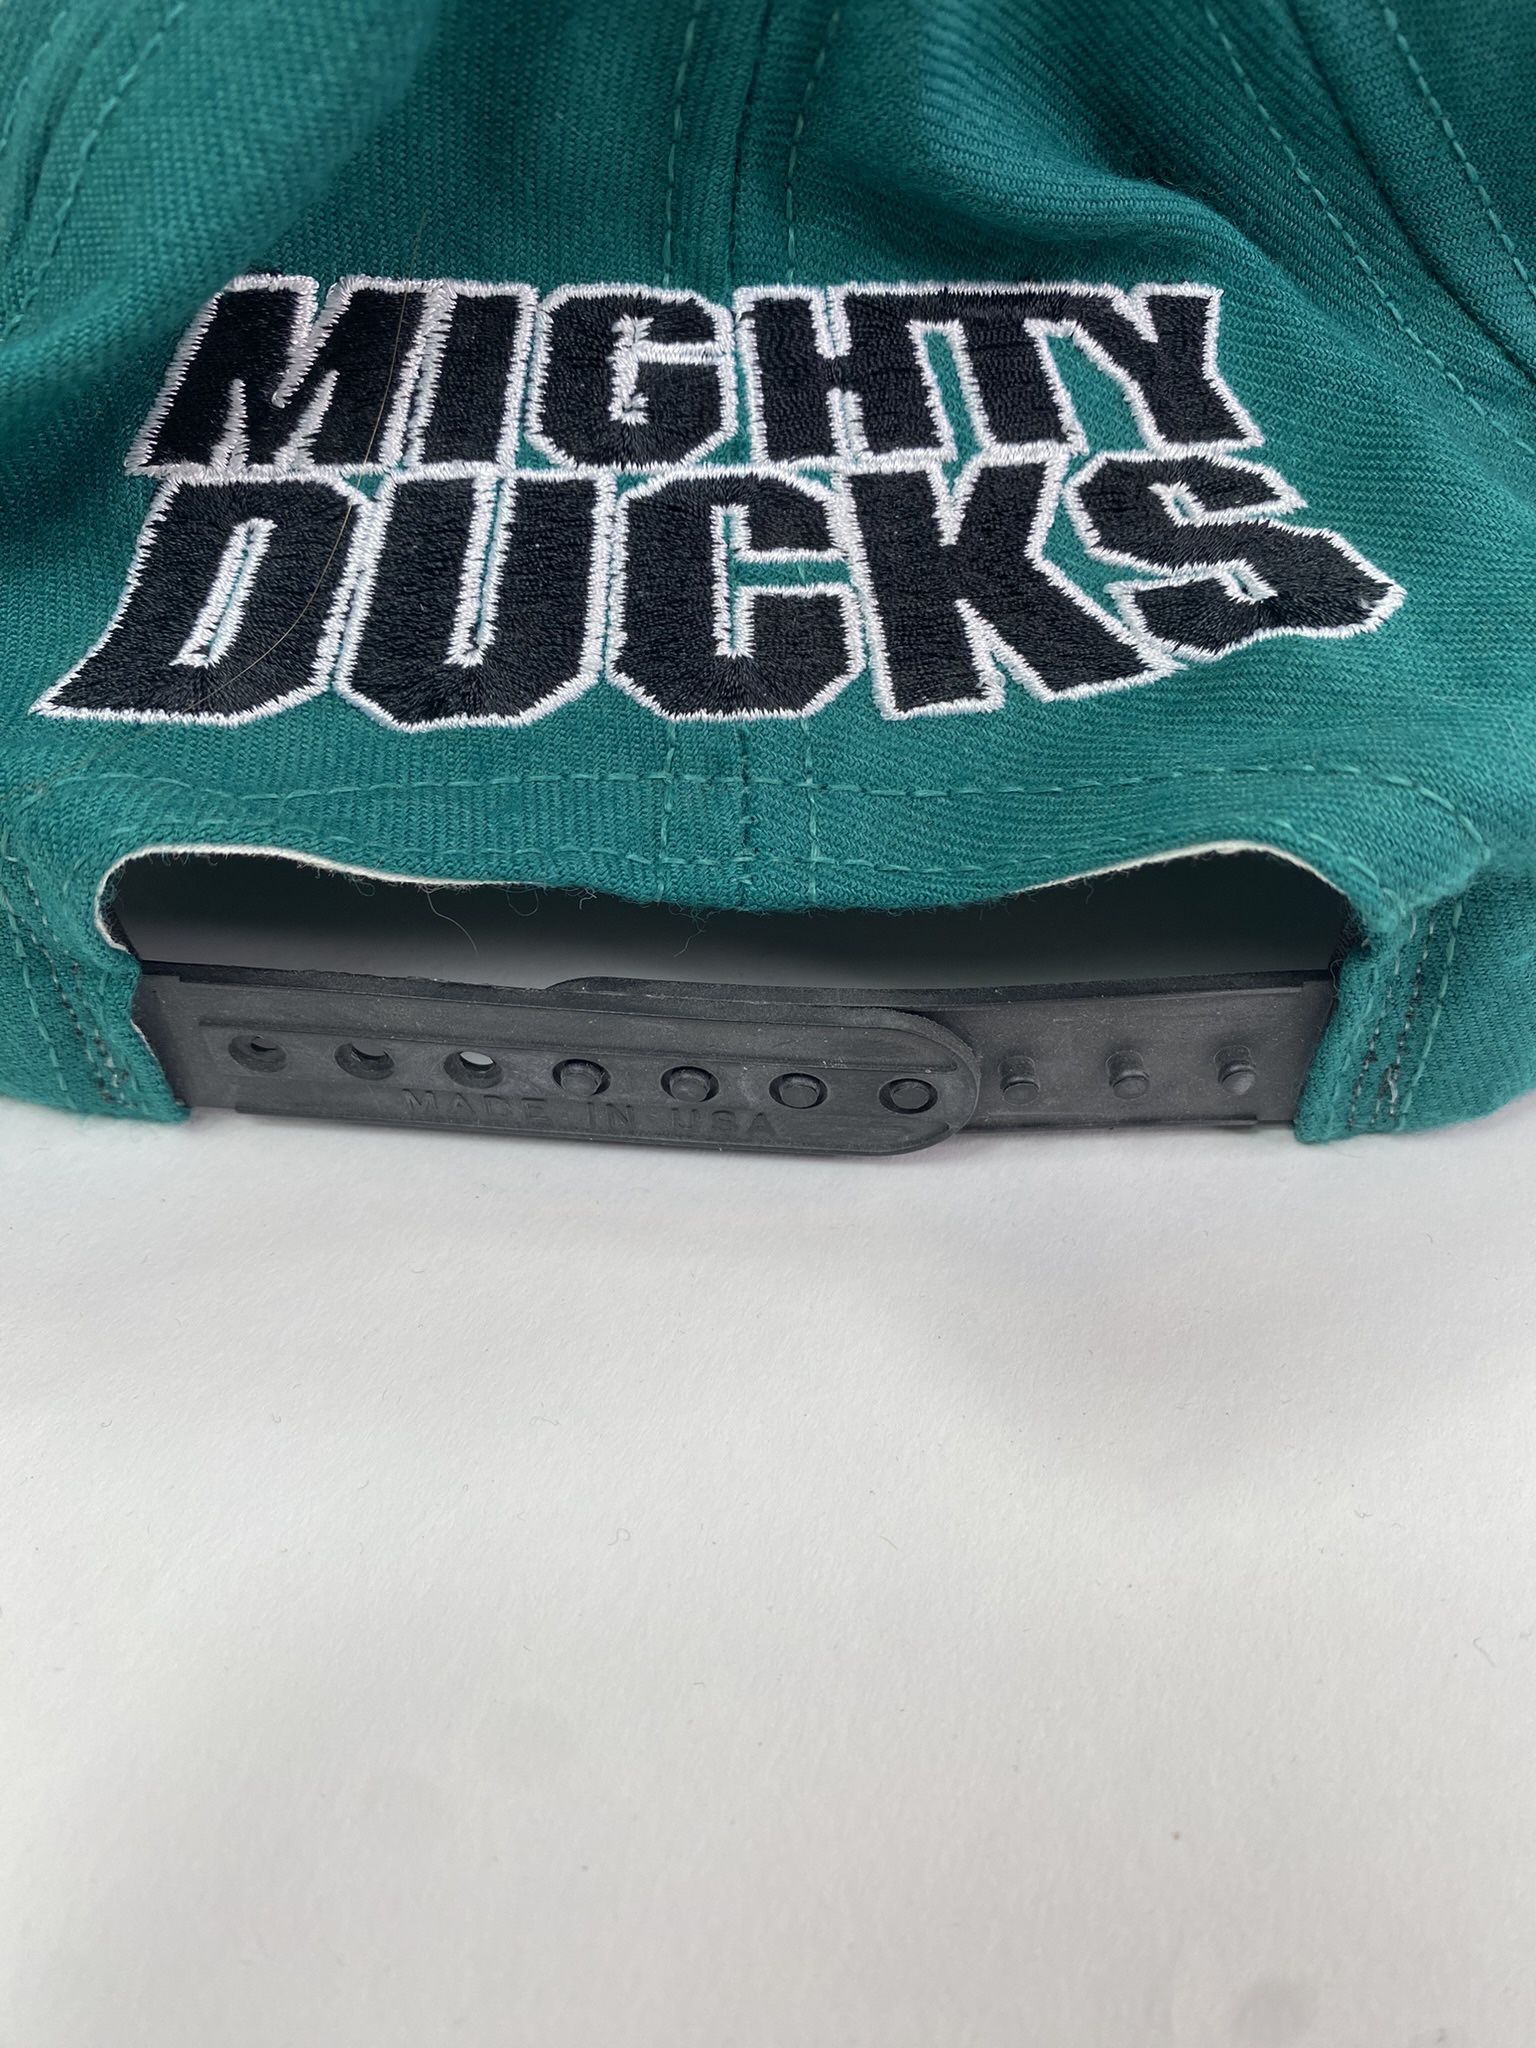 Vintage Anaheim Mighty Ducks 90s NHL Snapback Hat Cap for Sale in Tampa, FL  - OfferUp